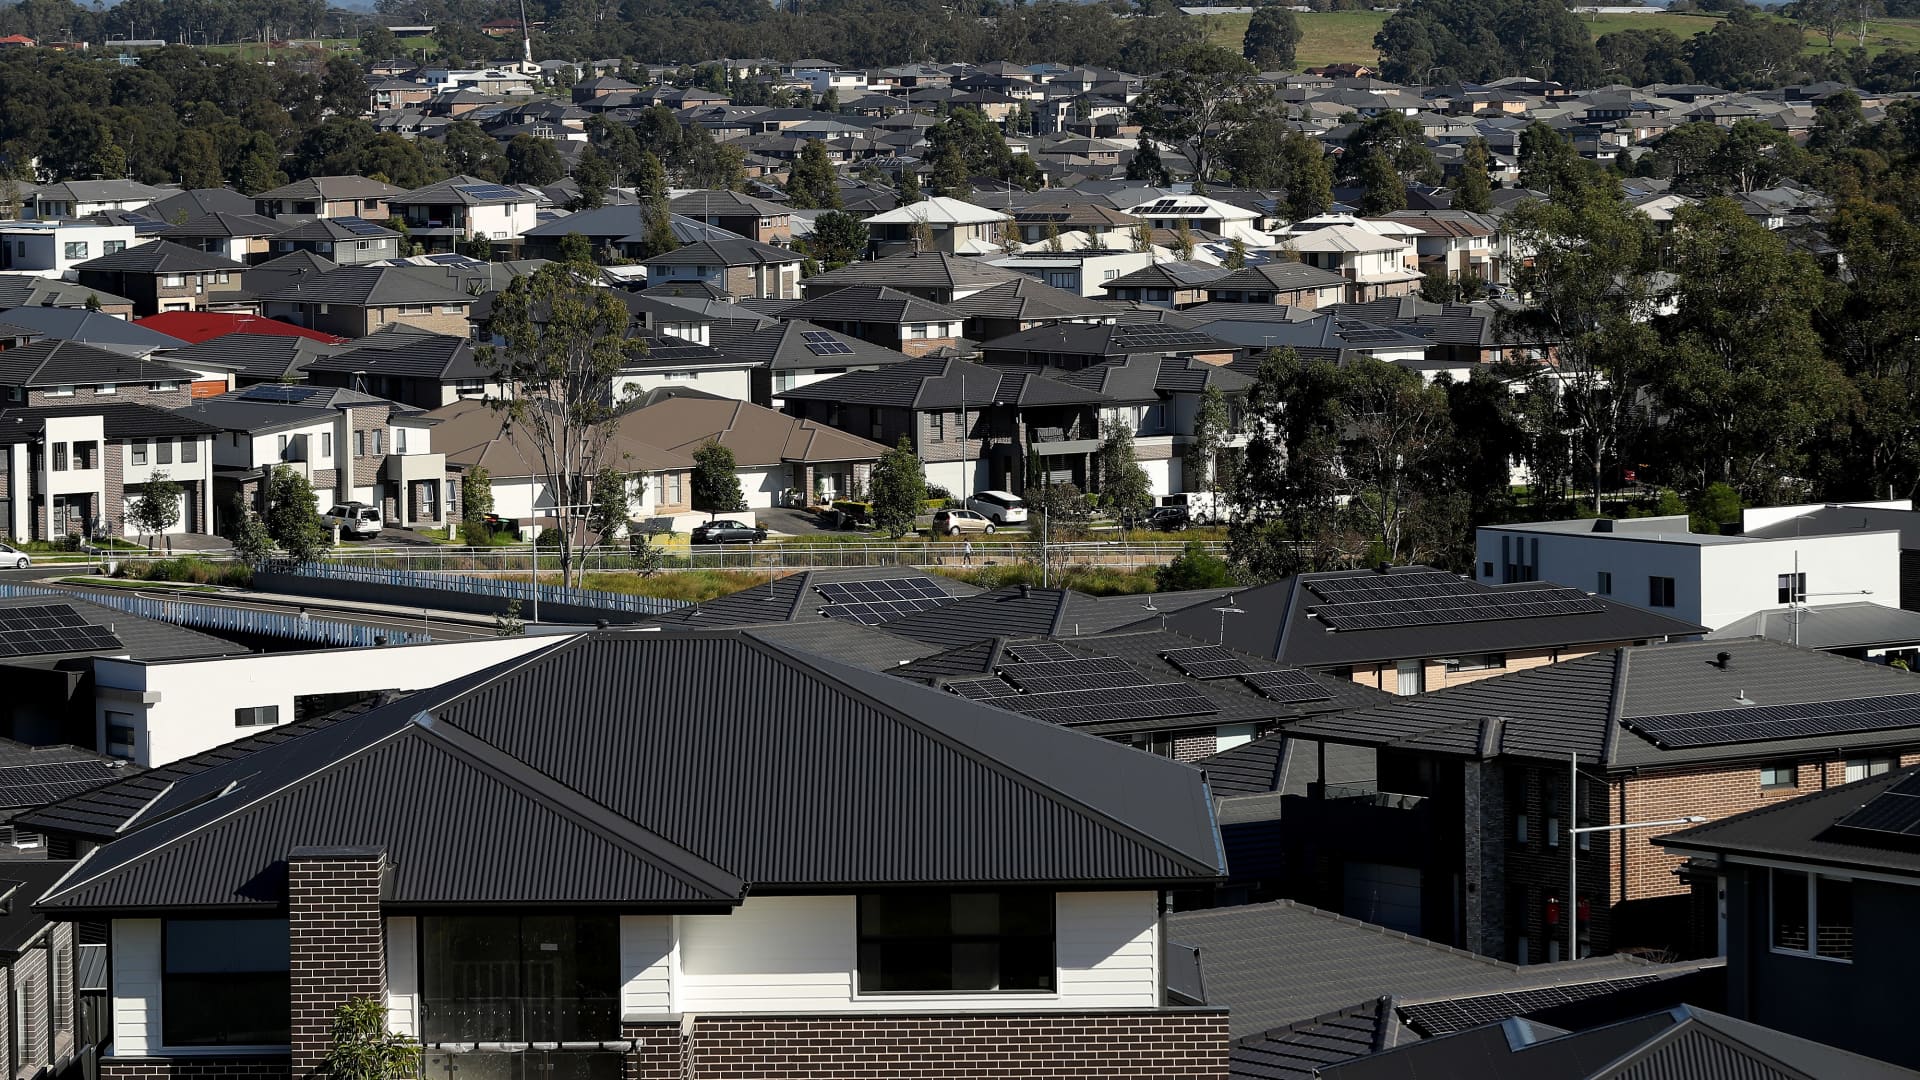 Australia’s house prices fall, interest rates soar but analysts say there’s no crash yet